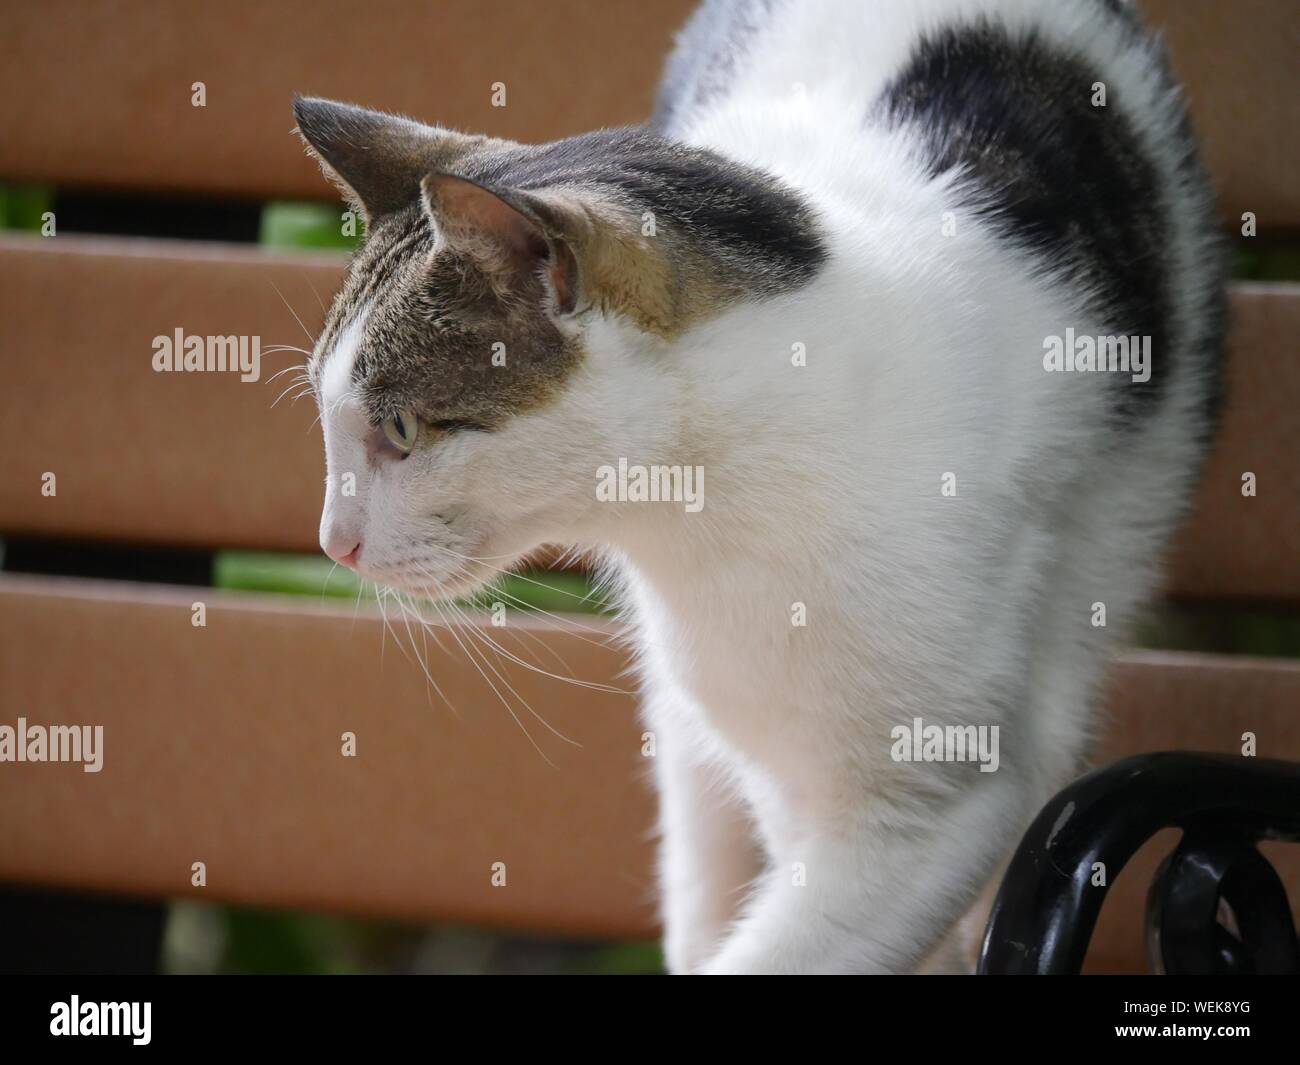 Cropped shot of a cat standing up on a wooden bench Stock Photo